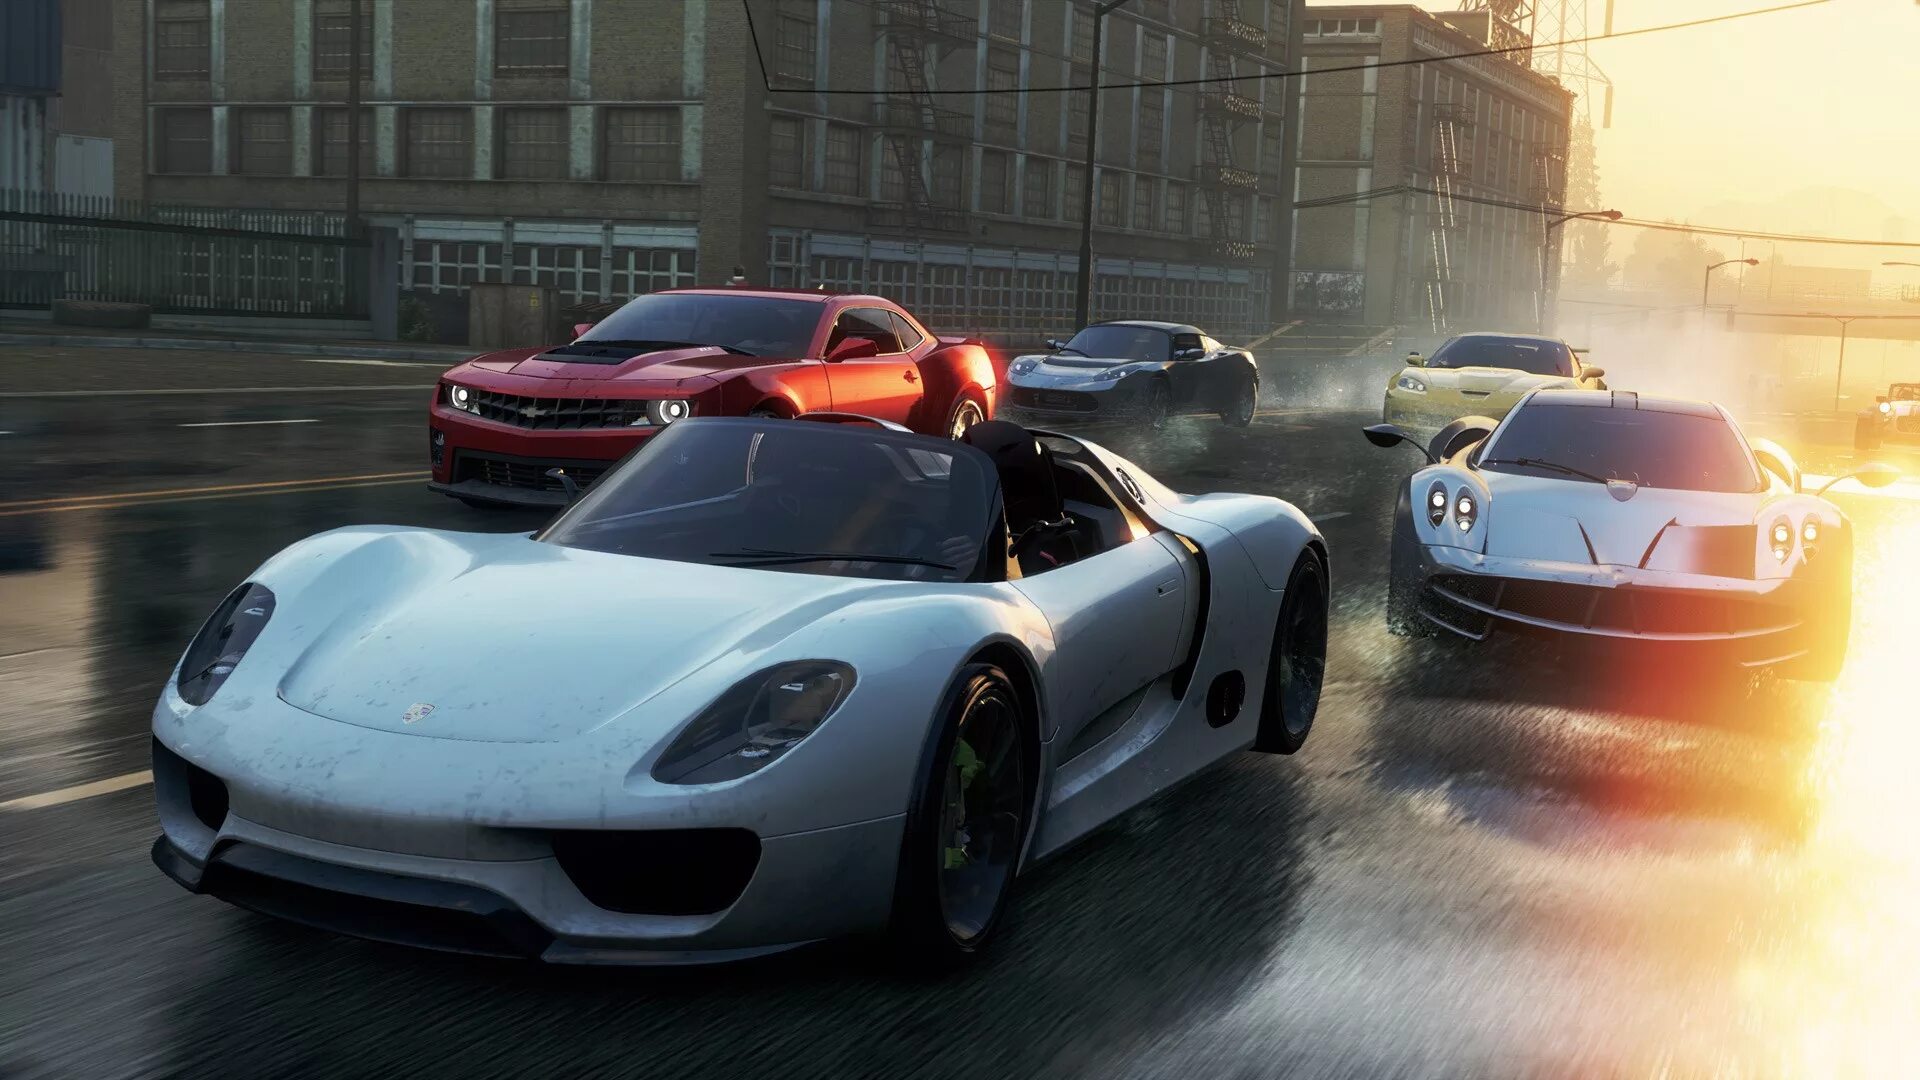 Need for speed wanted game. Порше 918 Spyder NFS most wanted. NFS most wanted 2012 Porsche 918 Spyder. Porsche 918 Spyder Concept most wanted 2012. Porsche 918 Спайдер NFS most wanted.